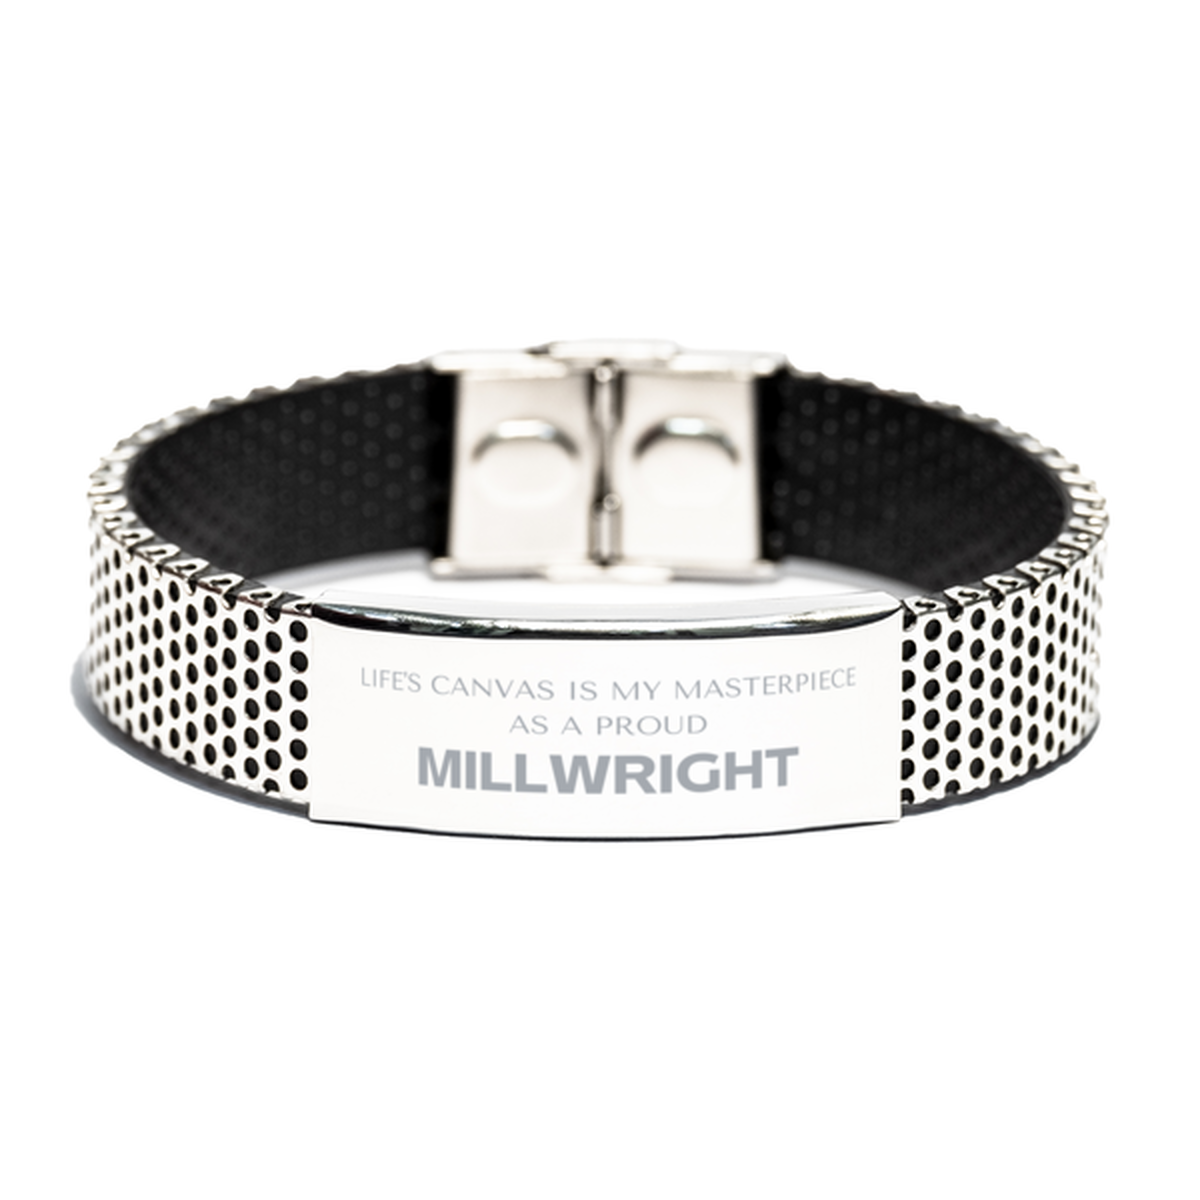 Proud Millwright Gifts, Life's canvas is my masterpiece, Epic Birthday Christmas Unique Stainless Steel Bracelet For Millwright, Coworkers, Men, Women, Friends